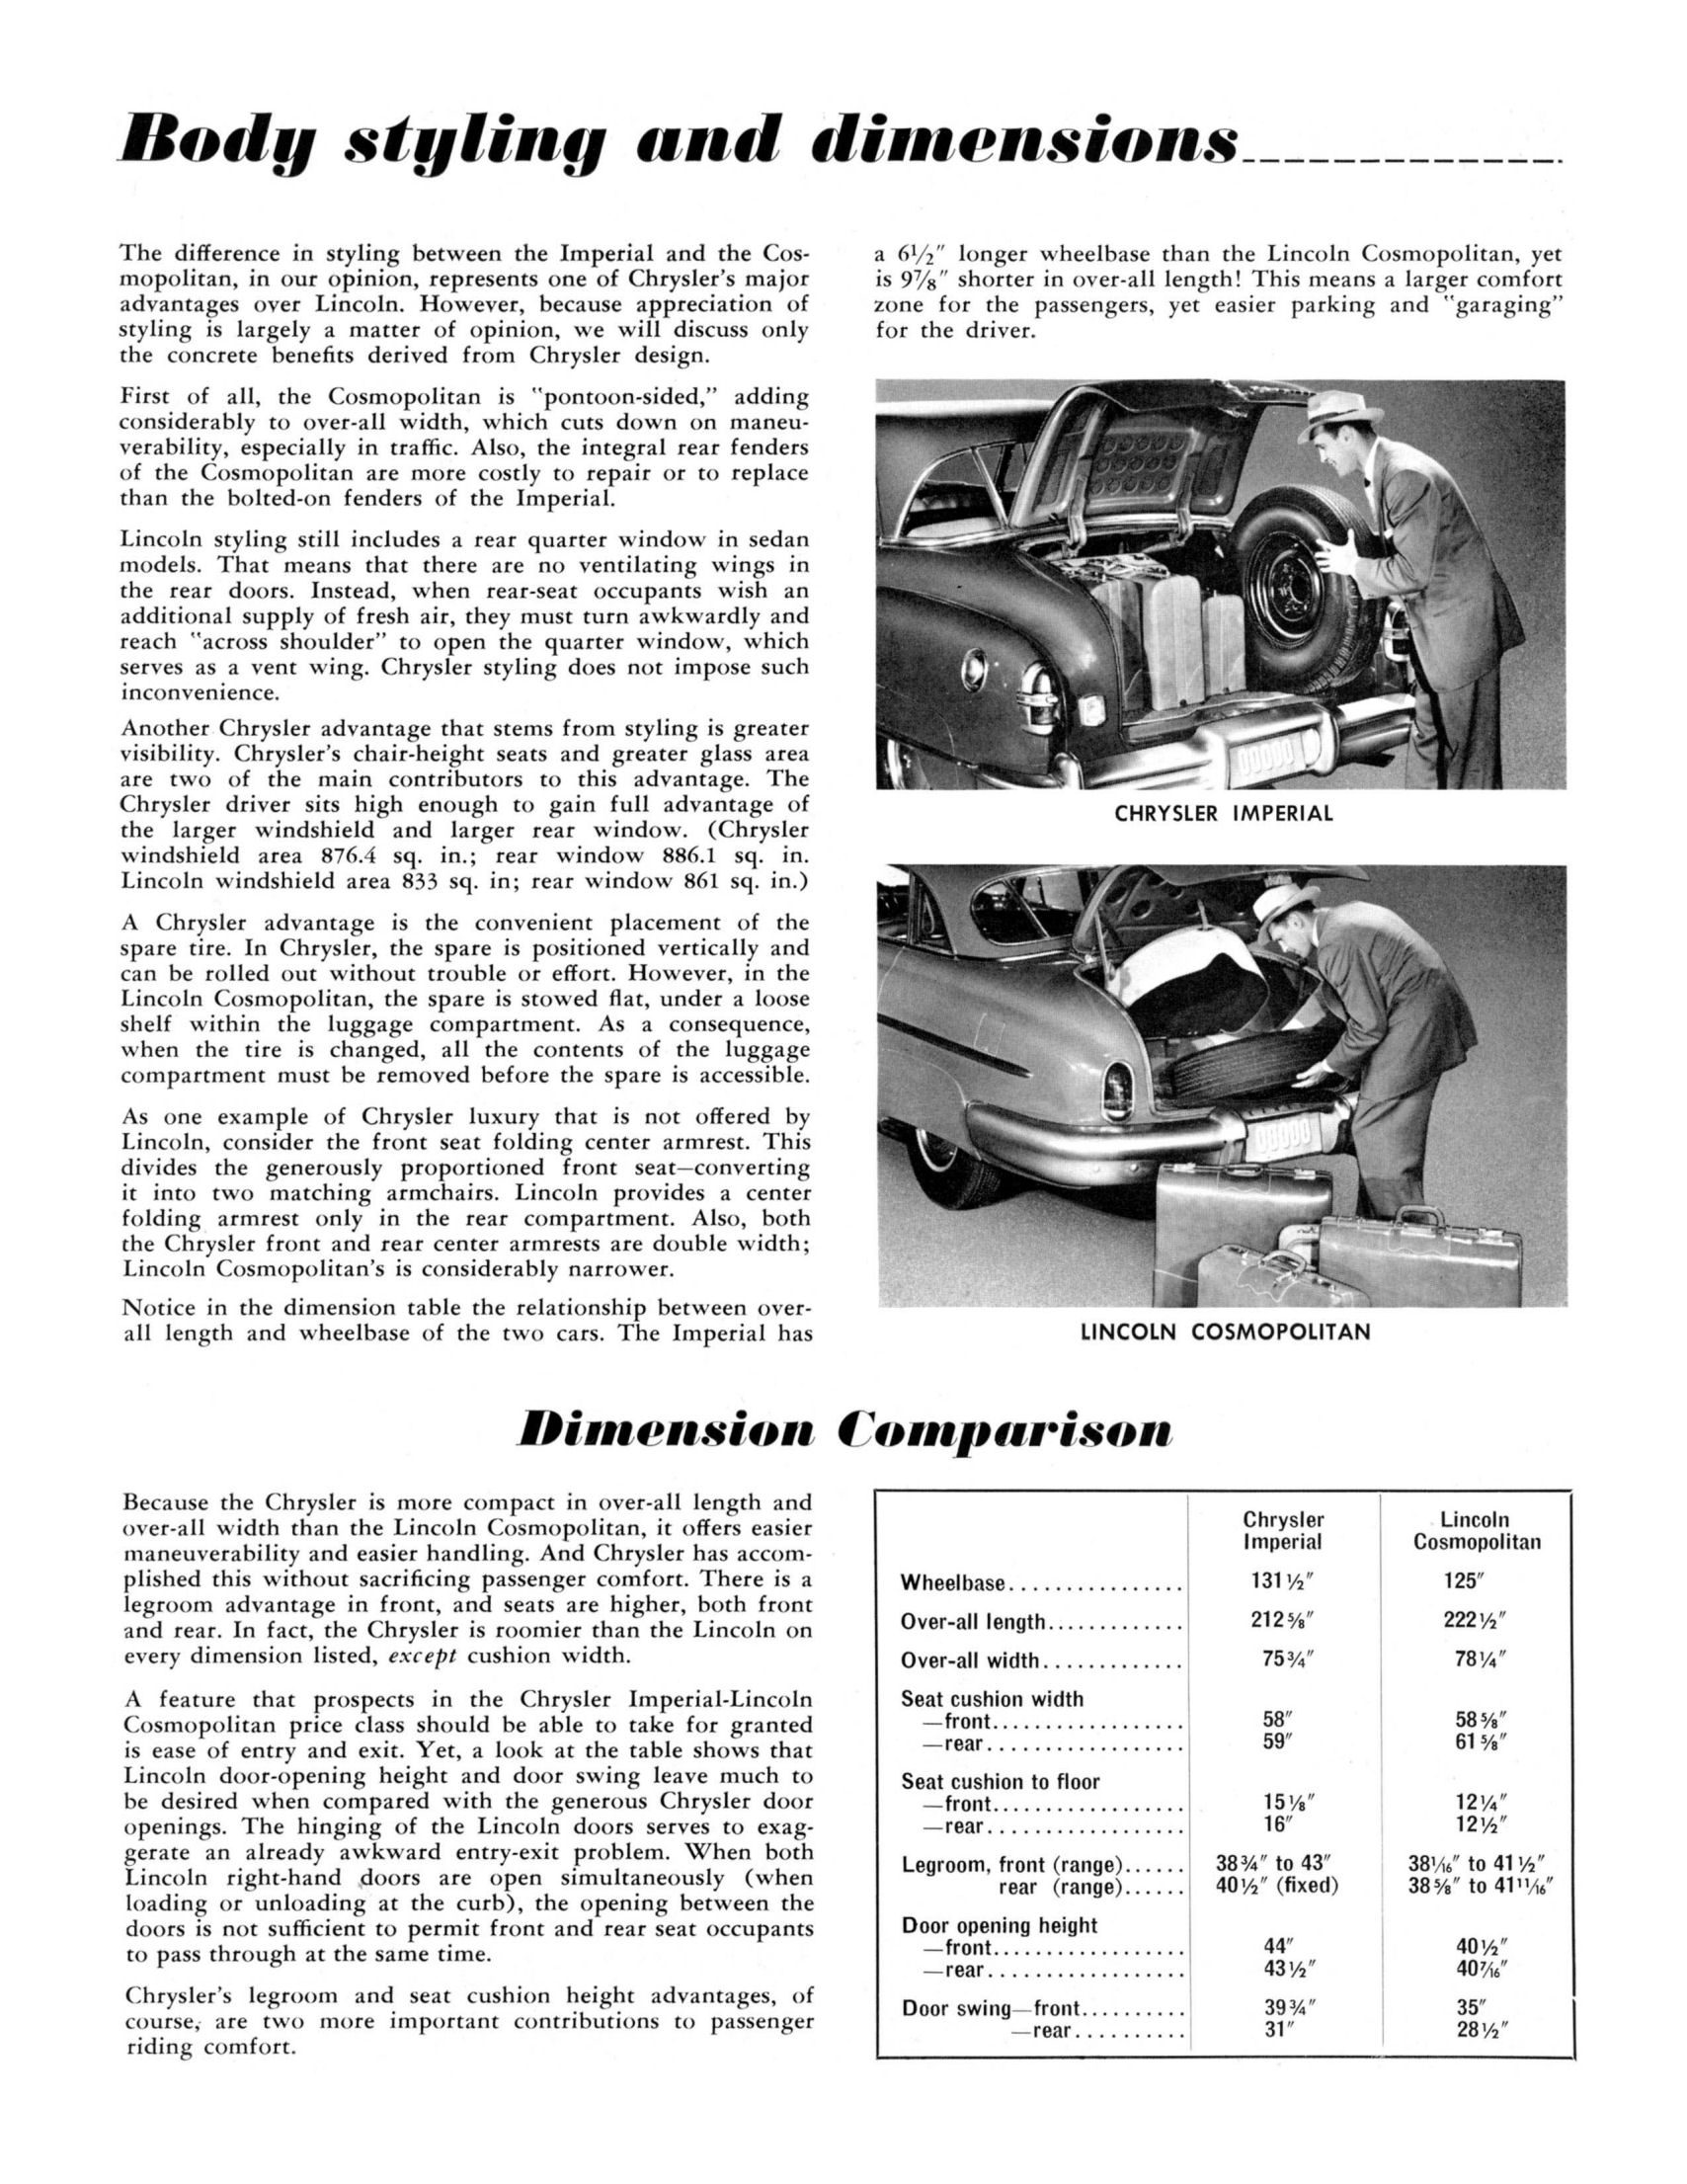 1951 Chrysler Imperial vs Lincoln Brochure Page 3